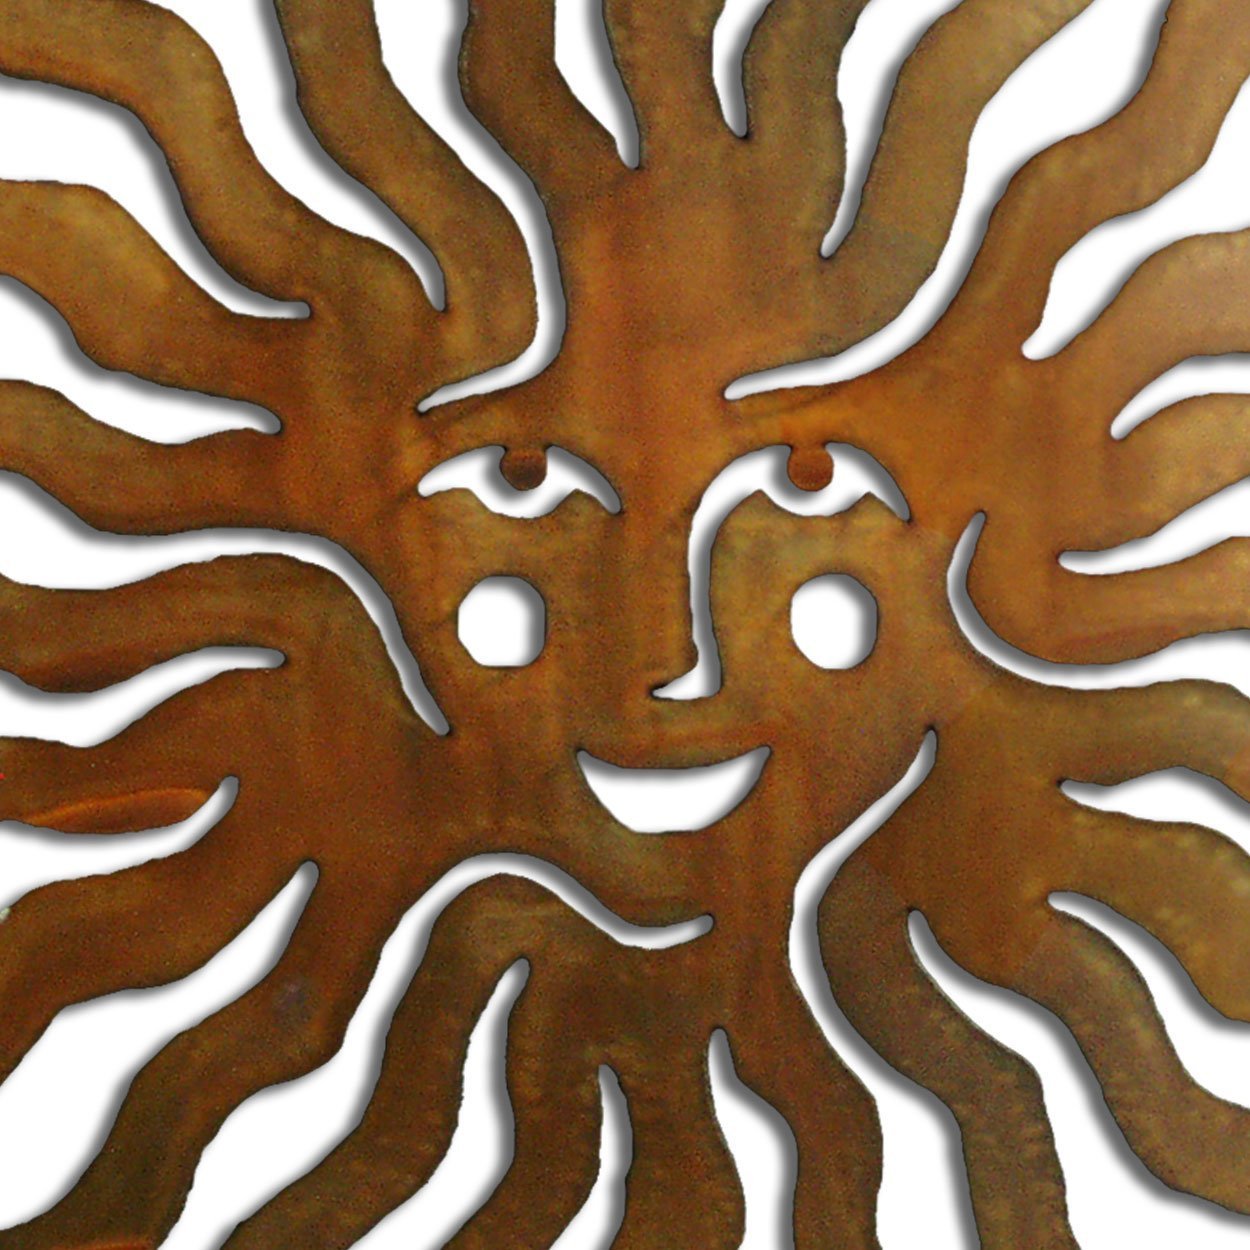 165234 - 30-inch extra large Sprite Sun Face 3D Metal Wall Art in a rich rust finish